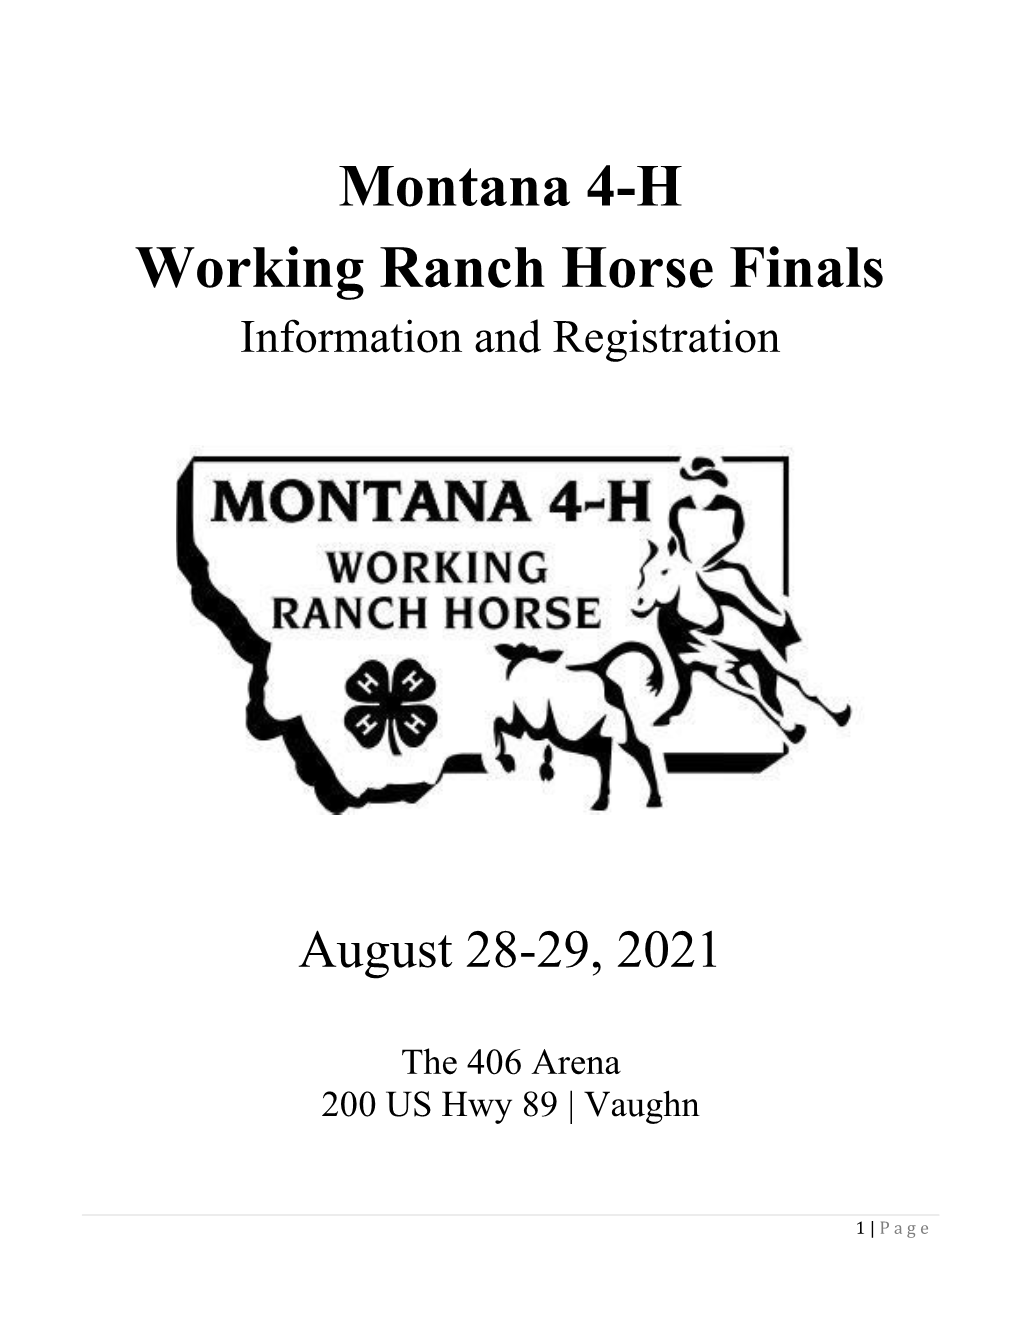 Montana 4-H Working Ranch Horse Finals Information and Registration